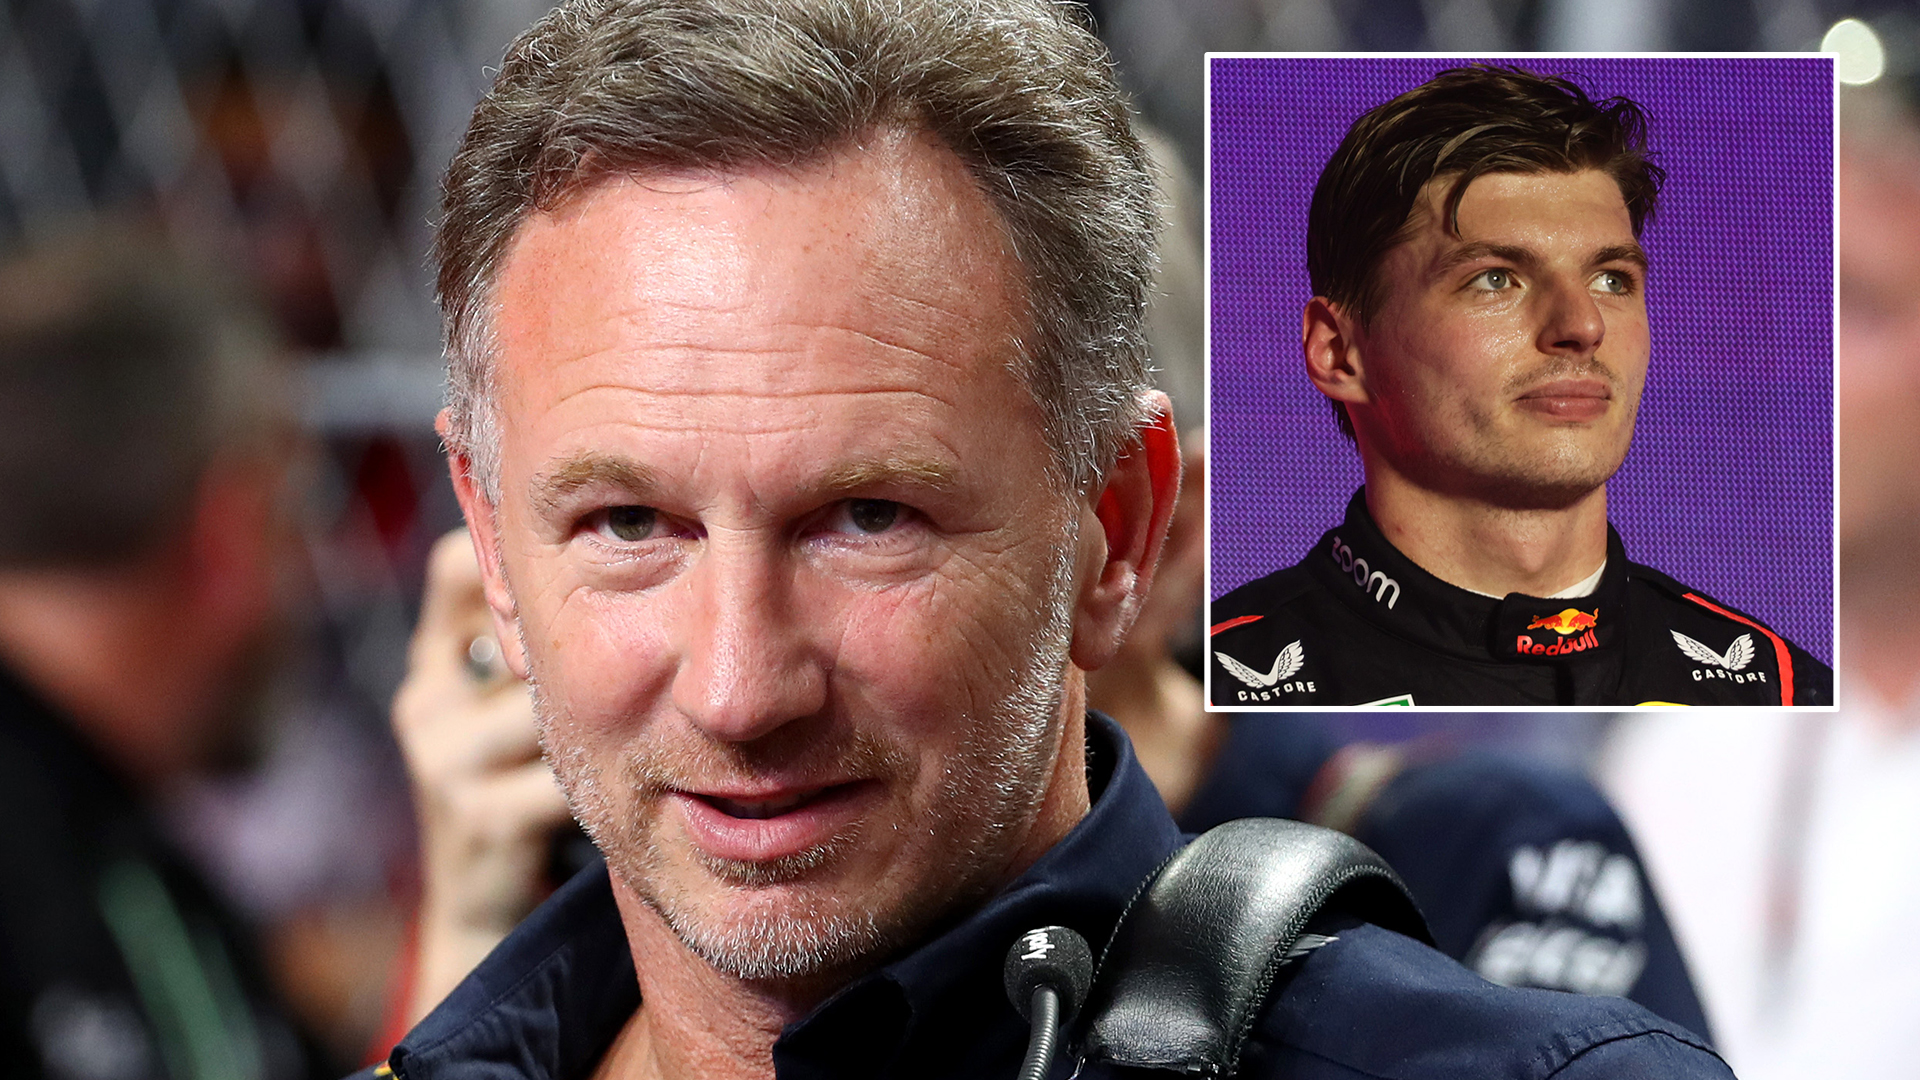 Christian Horner tells Max Verstappen he can LEAVE Red Bull if he wants in latest F1 bombshell following sext scandal